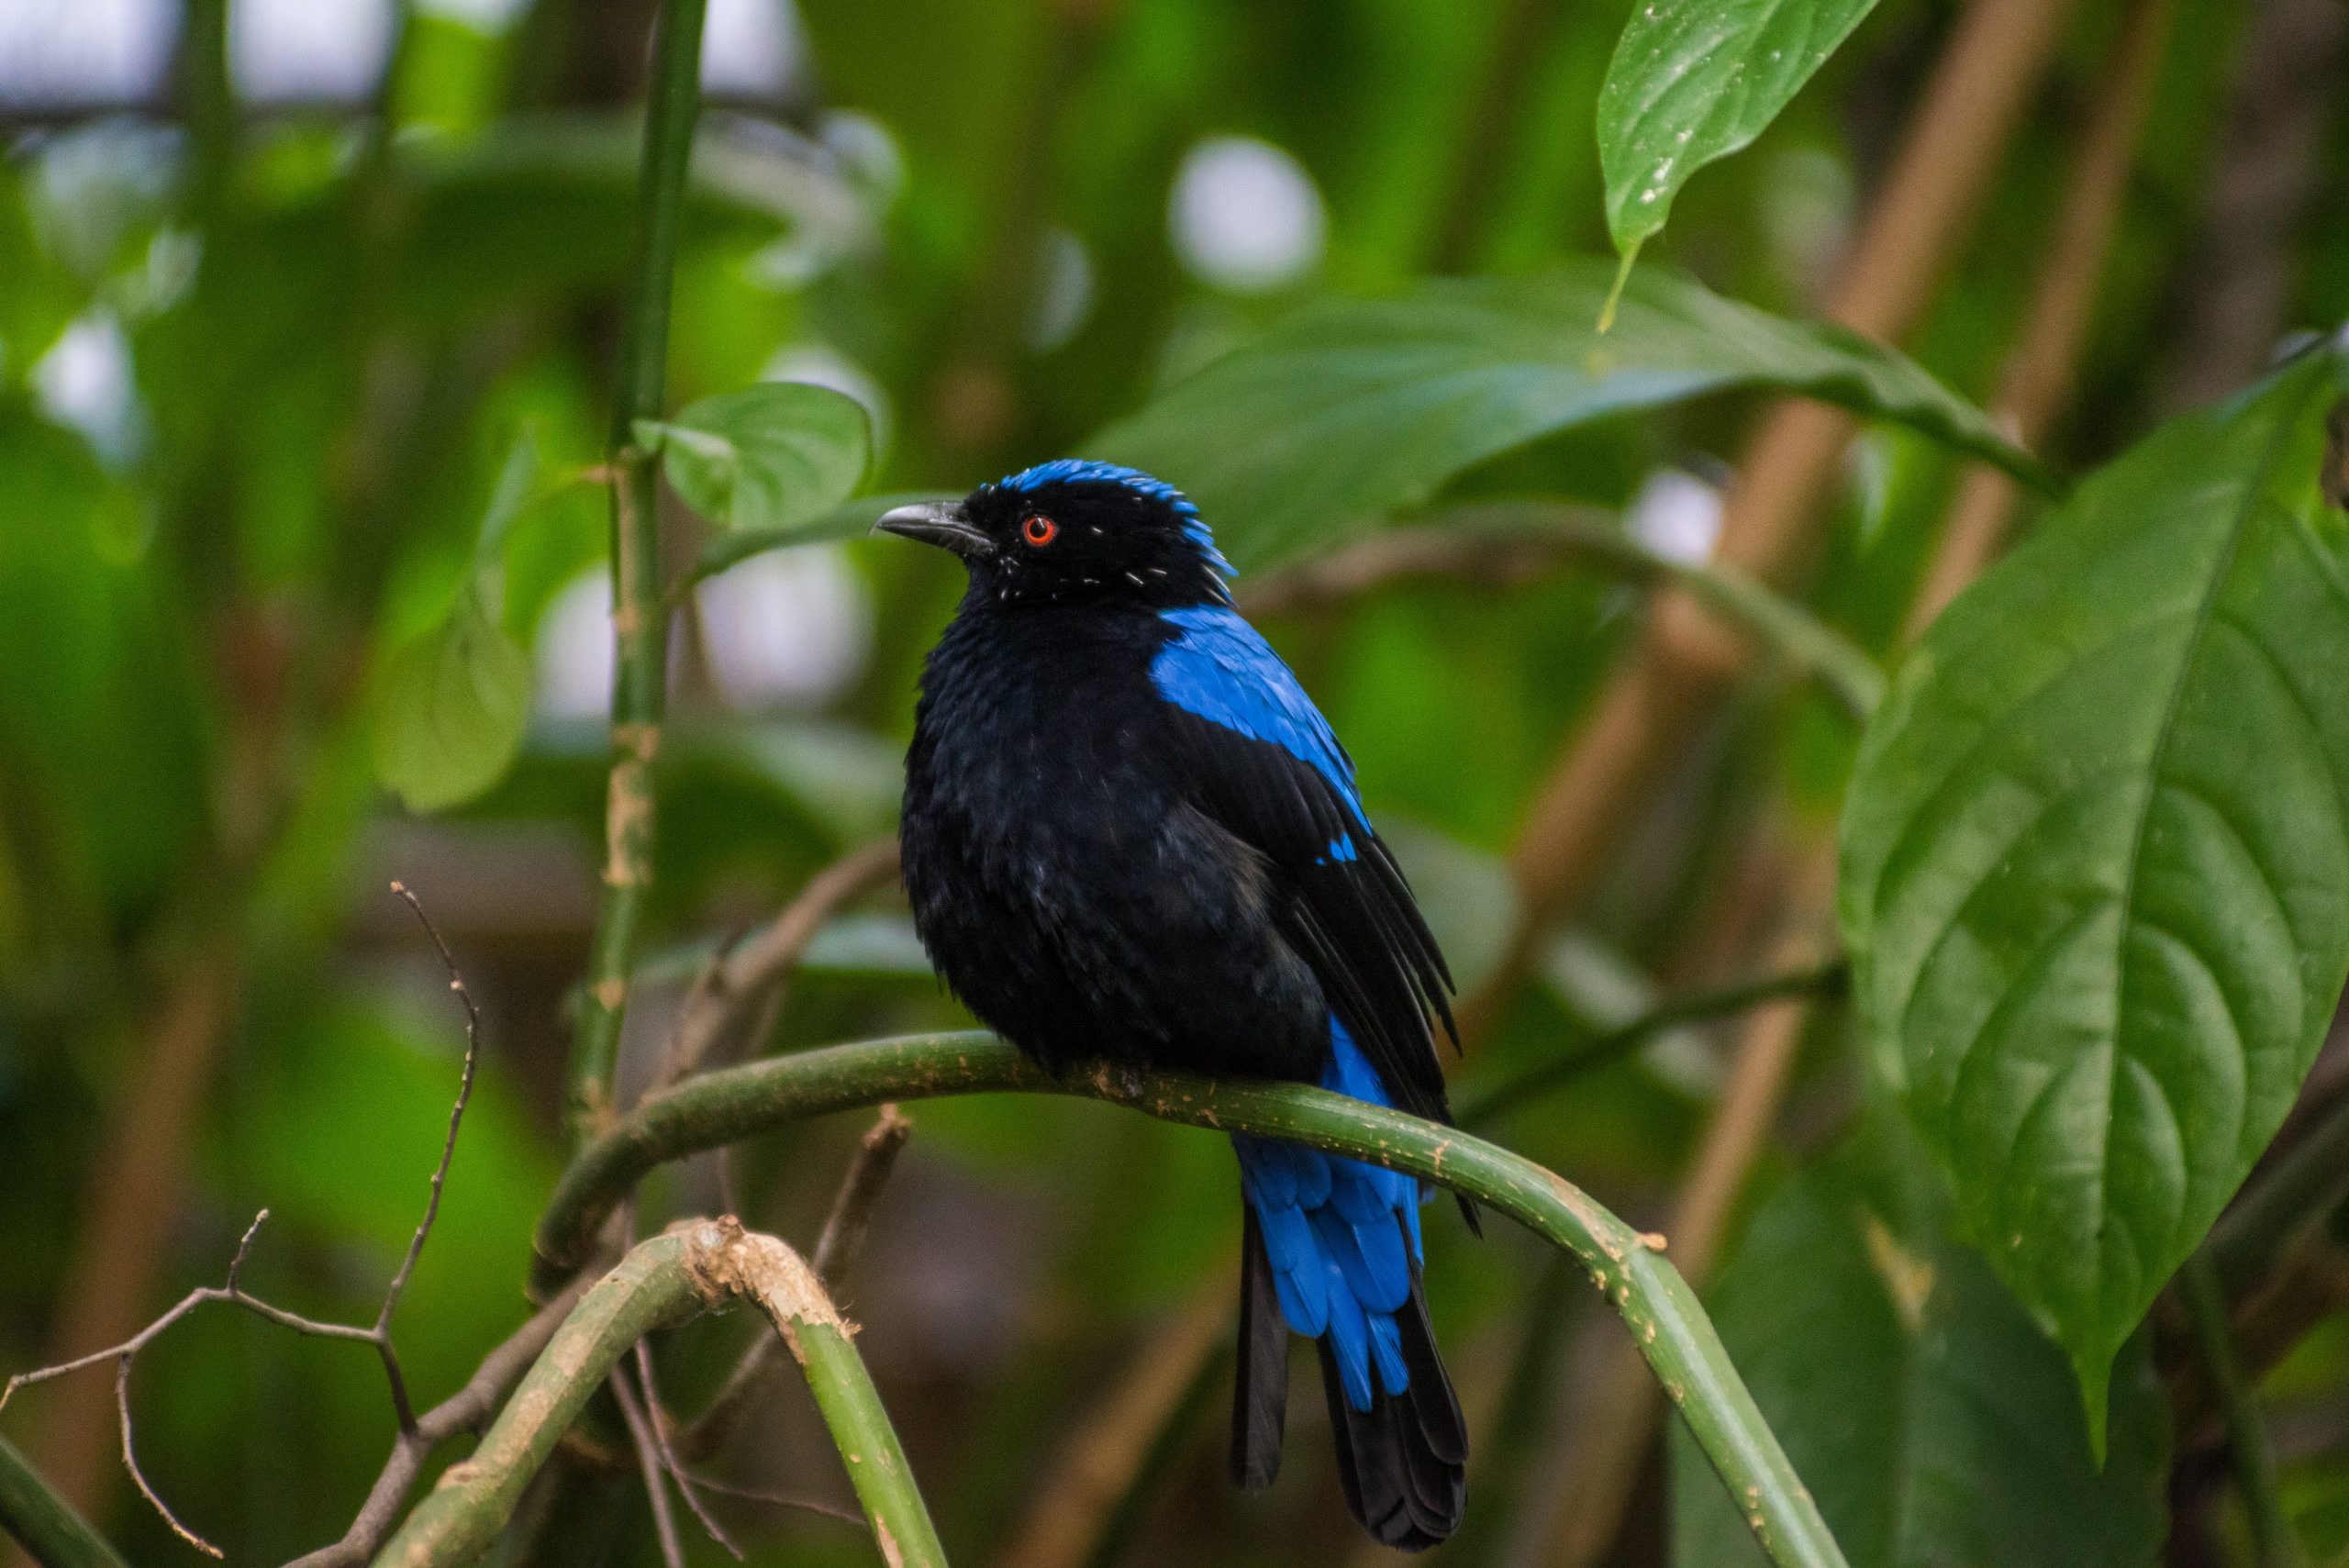 A Fairy Bluebird perched on a branch